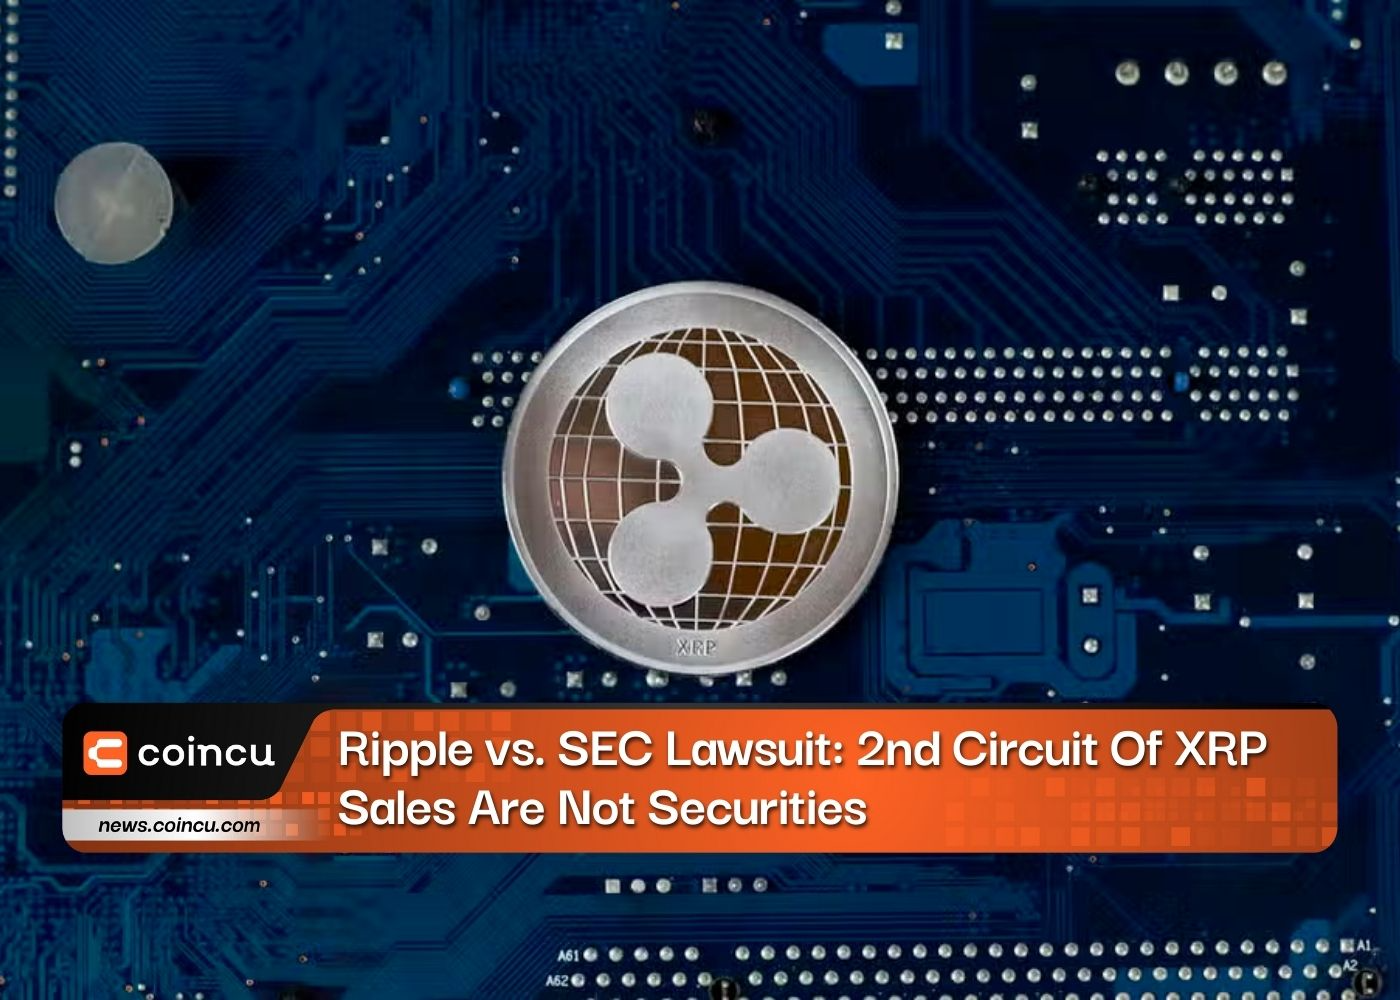 Ripple vs. SEC Lawsuit: 2nd Circuit Of XRP Sales Are Not Securities